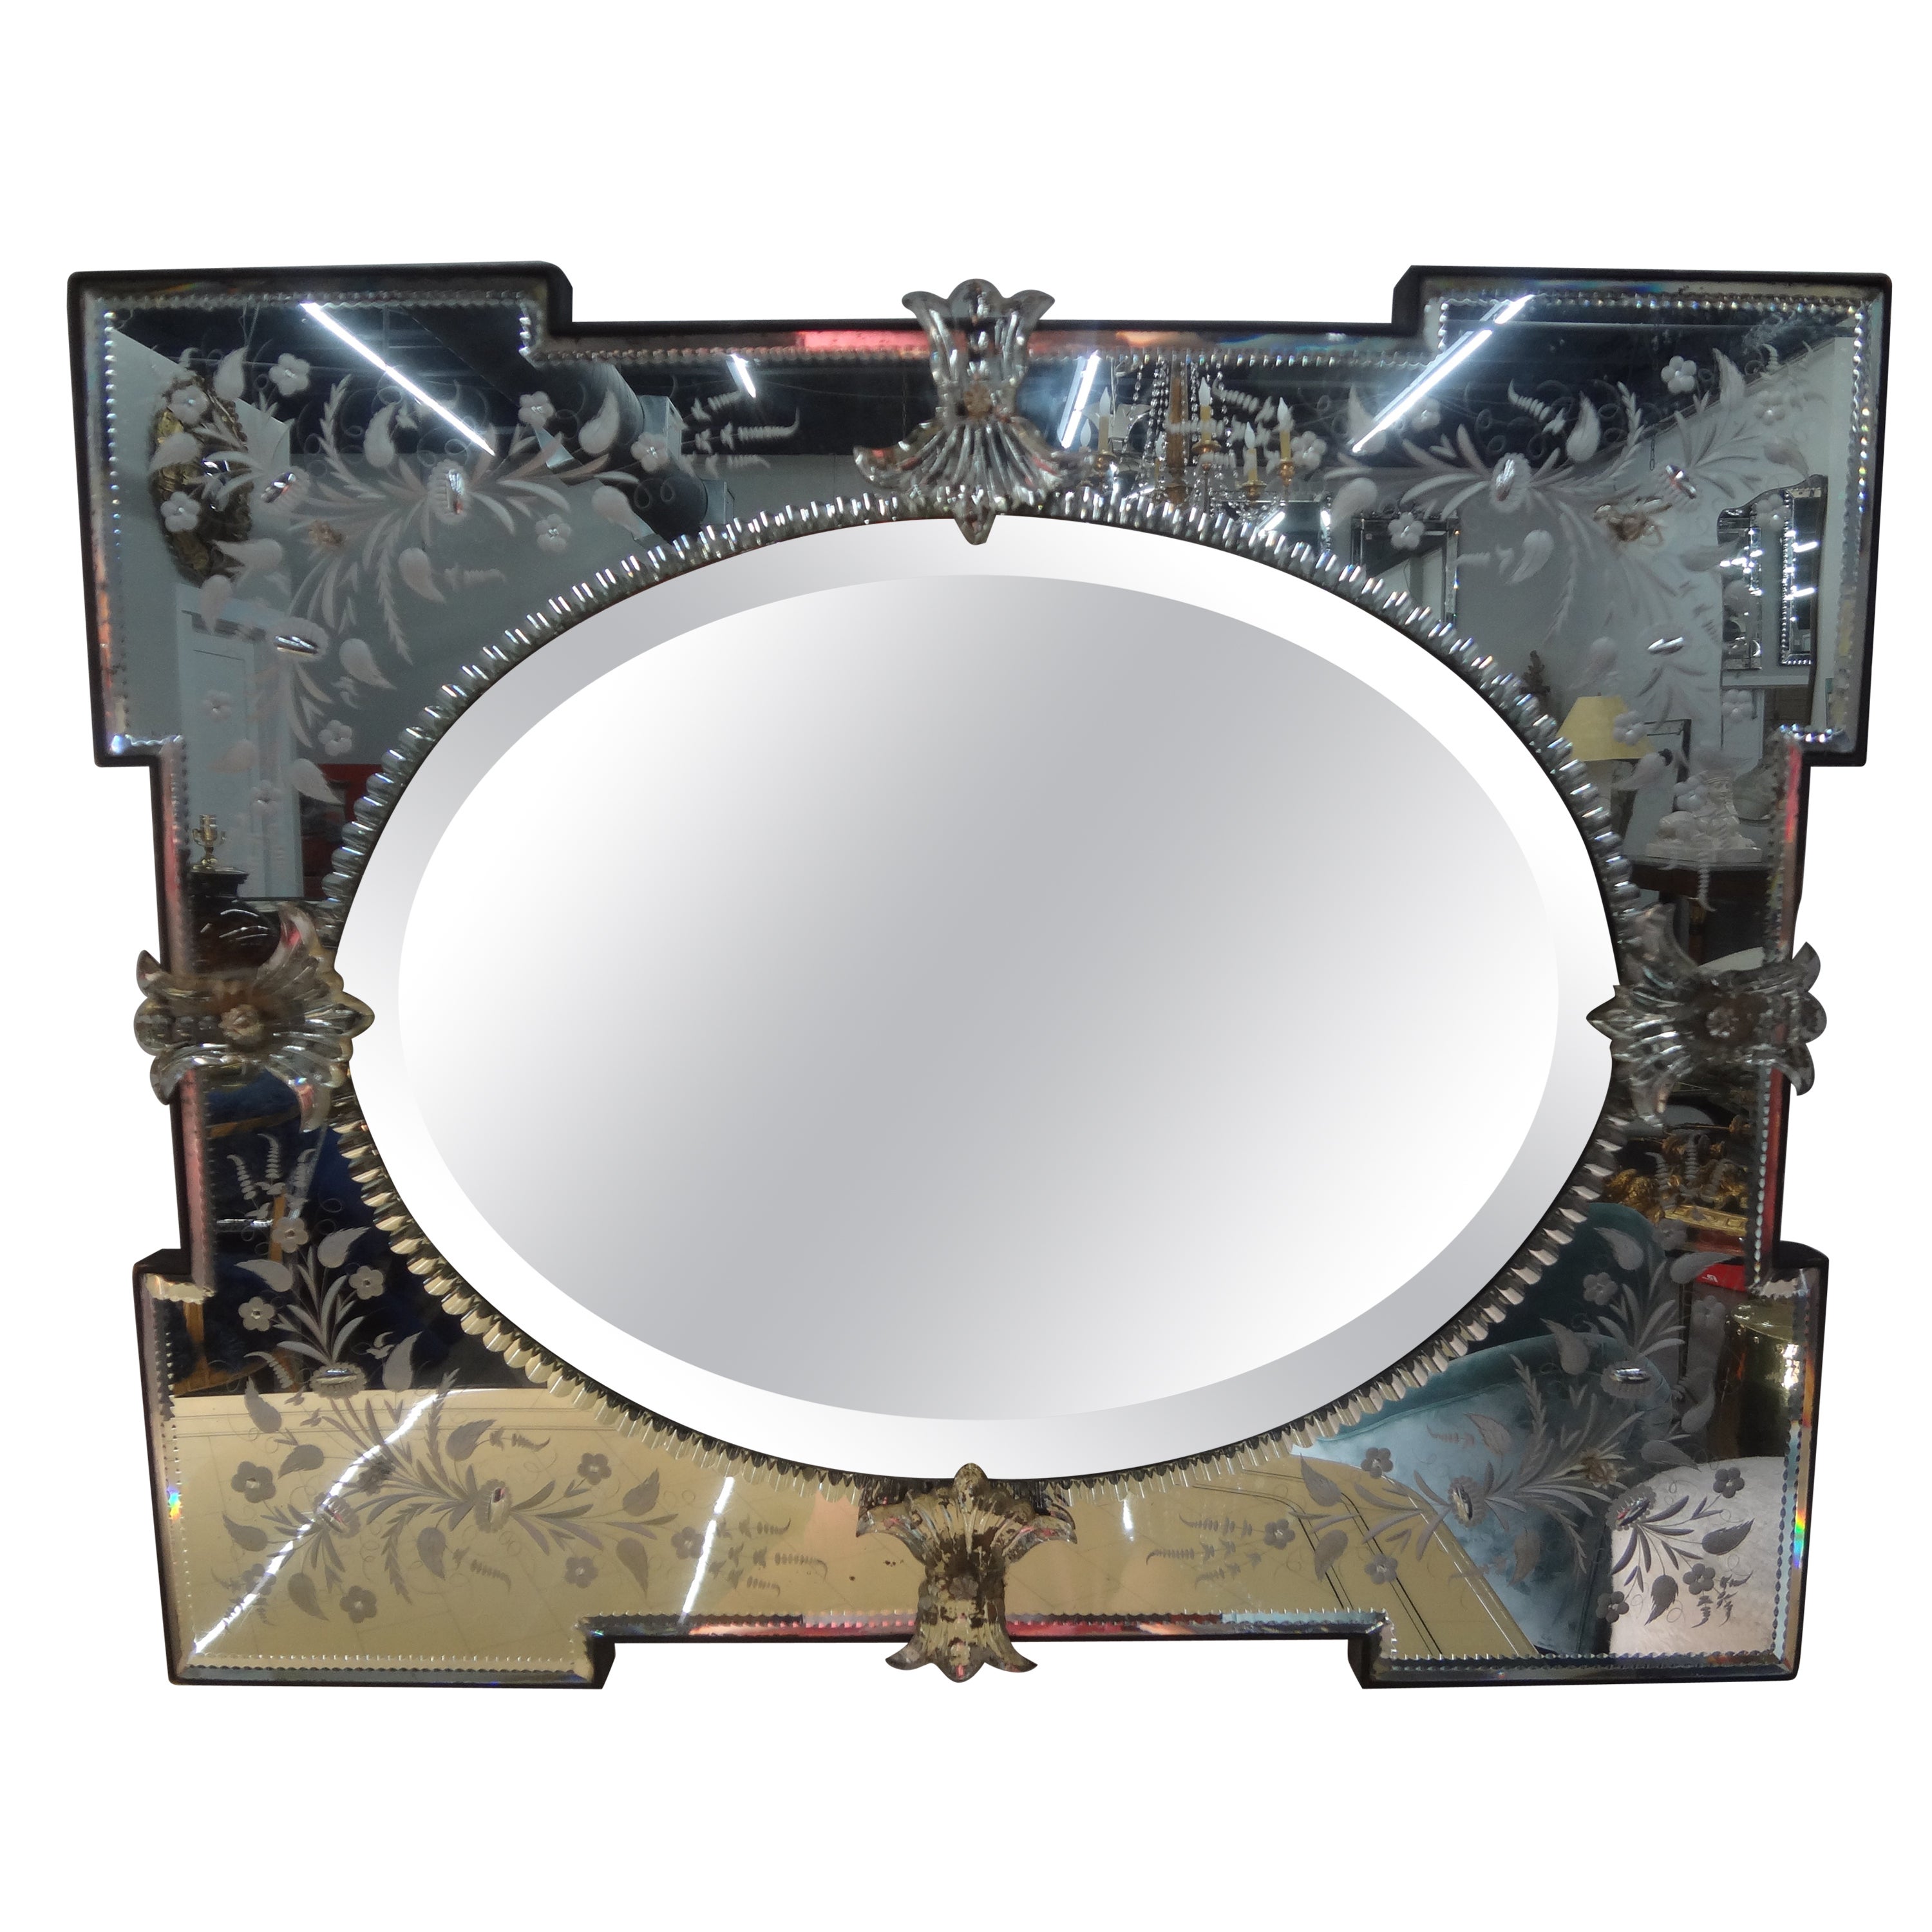 Etched and beveled Venetian mirror.
Interesting unusually shaped etched Venetian mirror with a beveled oval center. This unusual Venetian mirror which dates from the 1940's can be displayed either horizontally or vertically as needed. Perfect for a